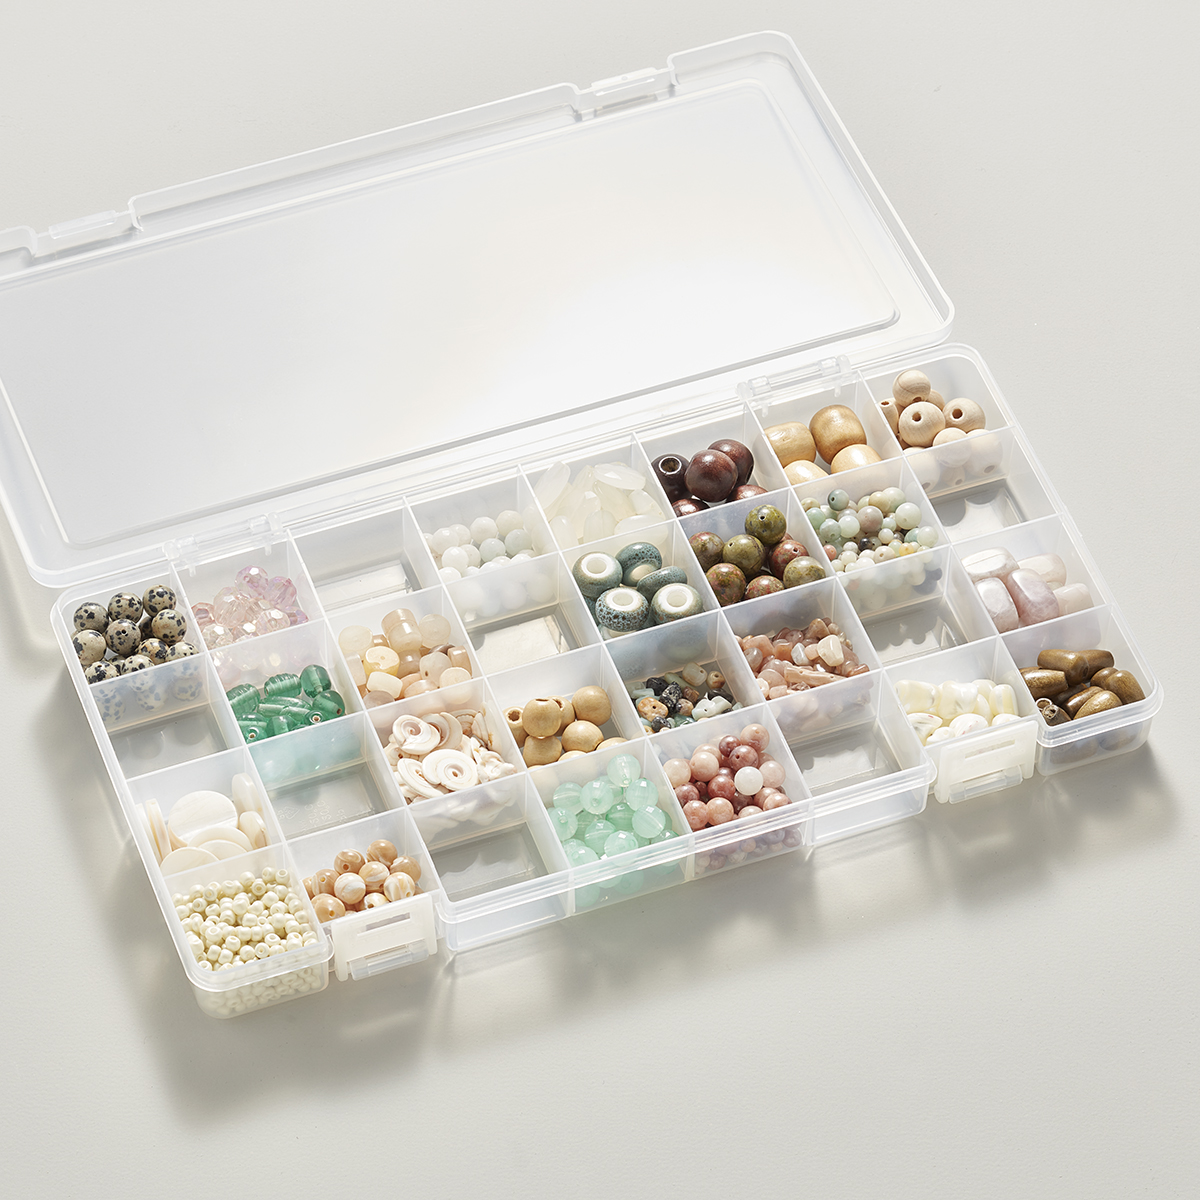 https://www.containerstore.com/catalogimages/466672/10051816-large-32-compartment-box-tr.jpg